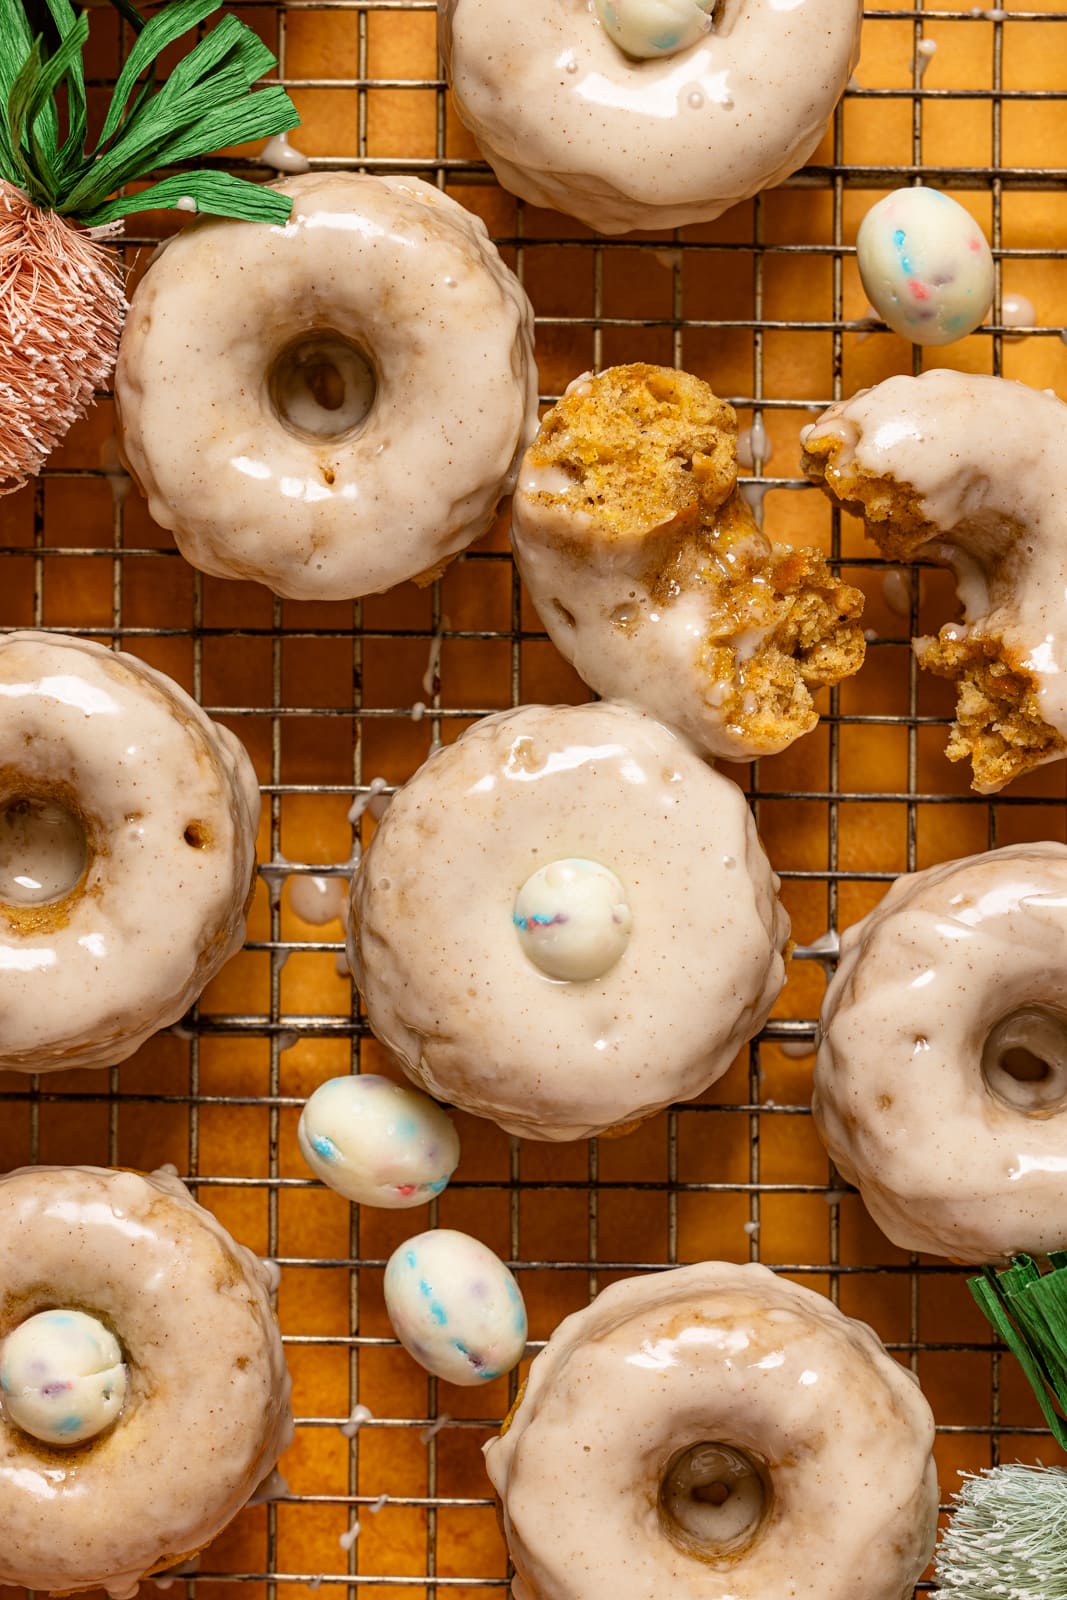 Up close shot of donuts with Easter decor.